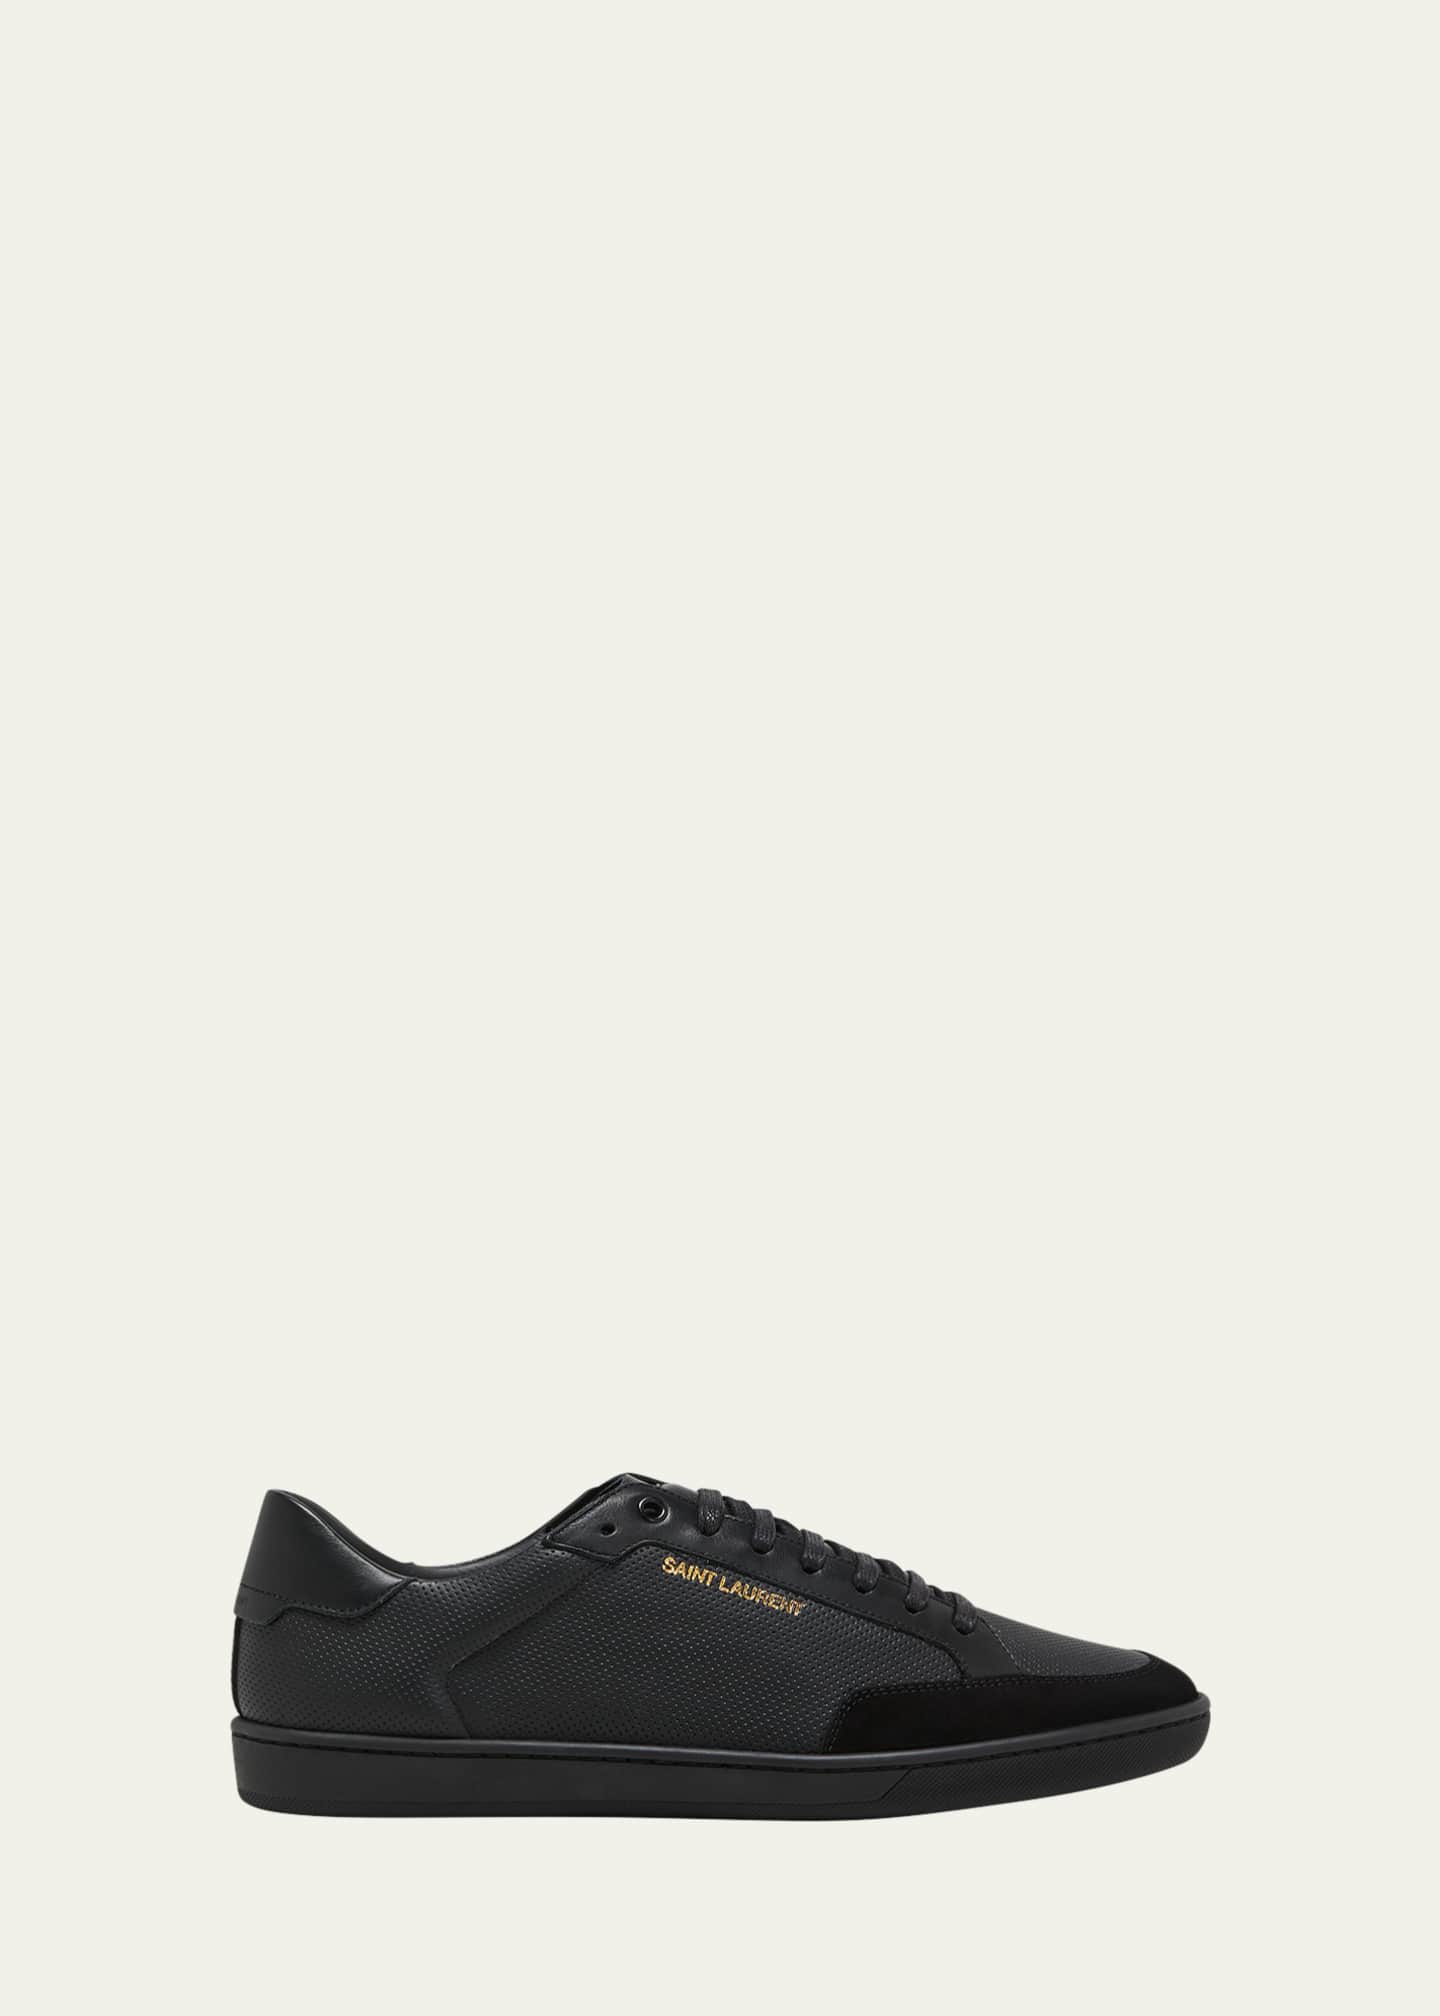 Saint Laurent Men's SL/10 Court Classic Perforated Leather Sneakers Image 1 of 5